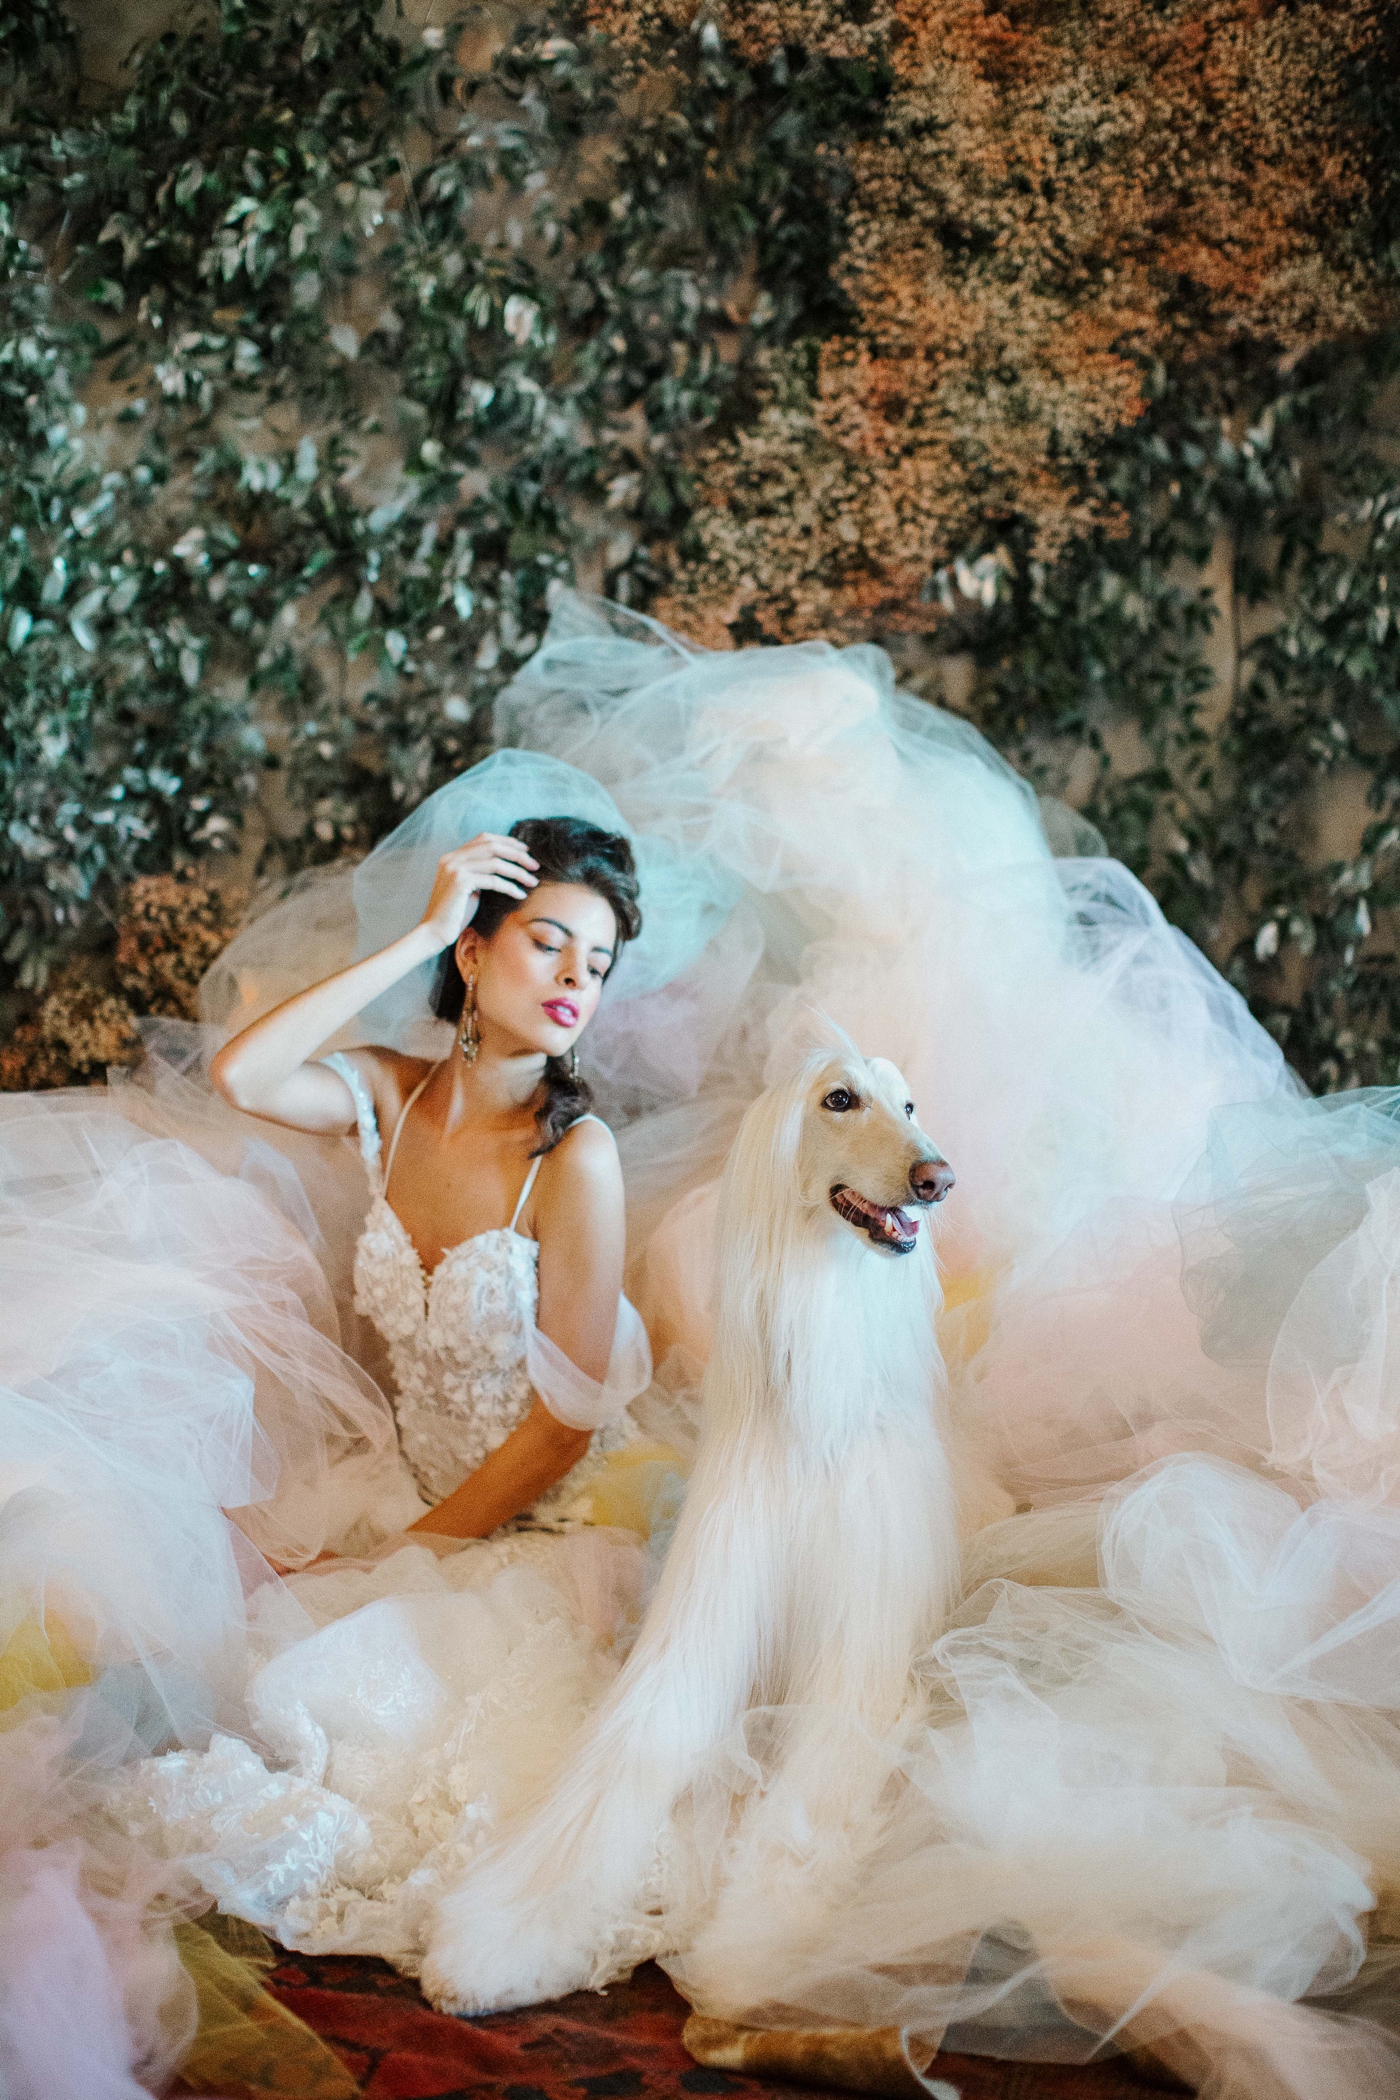 Baroque Sensibility Inspired Editorial Shoot at The Alida Hotel | Izzy and Co.